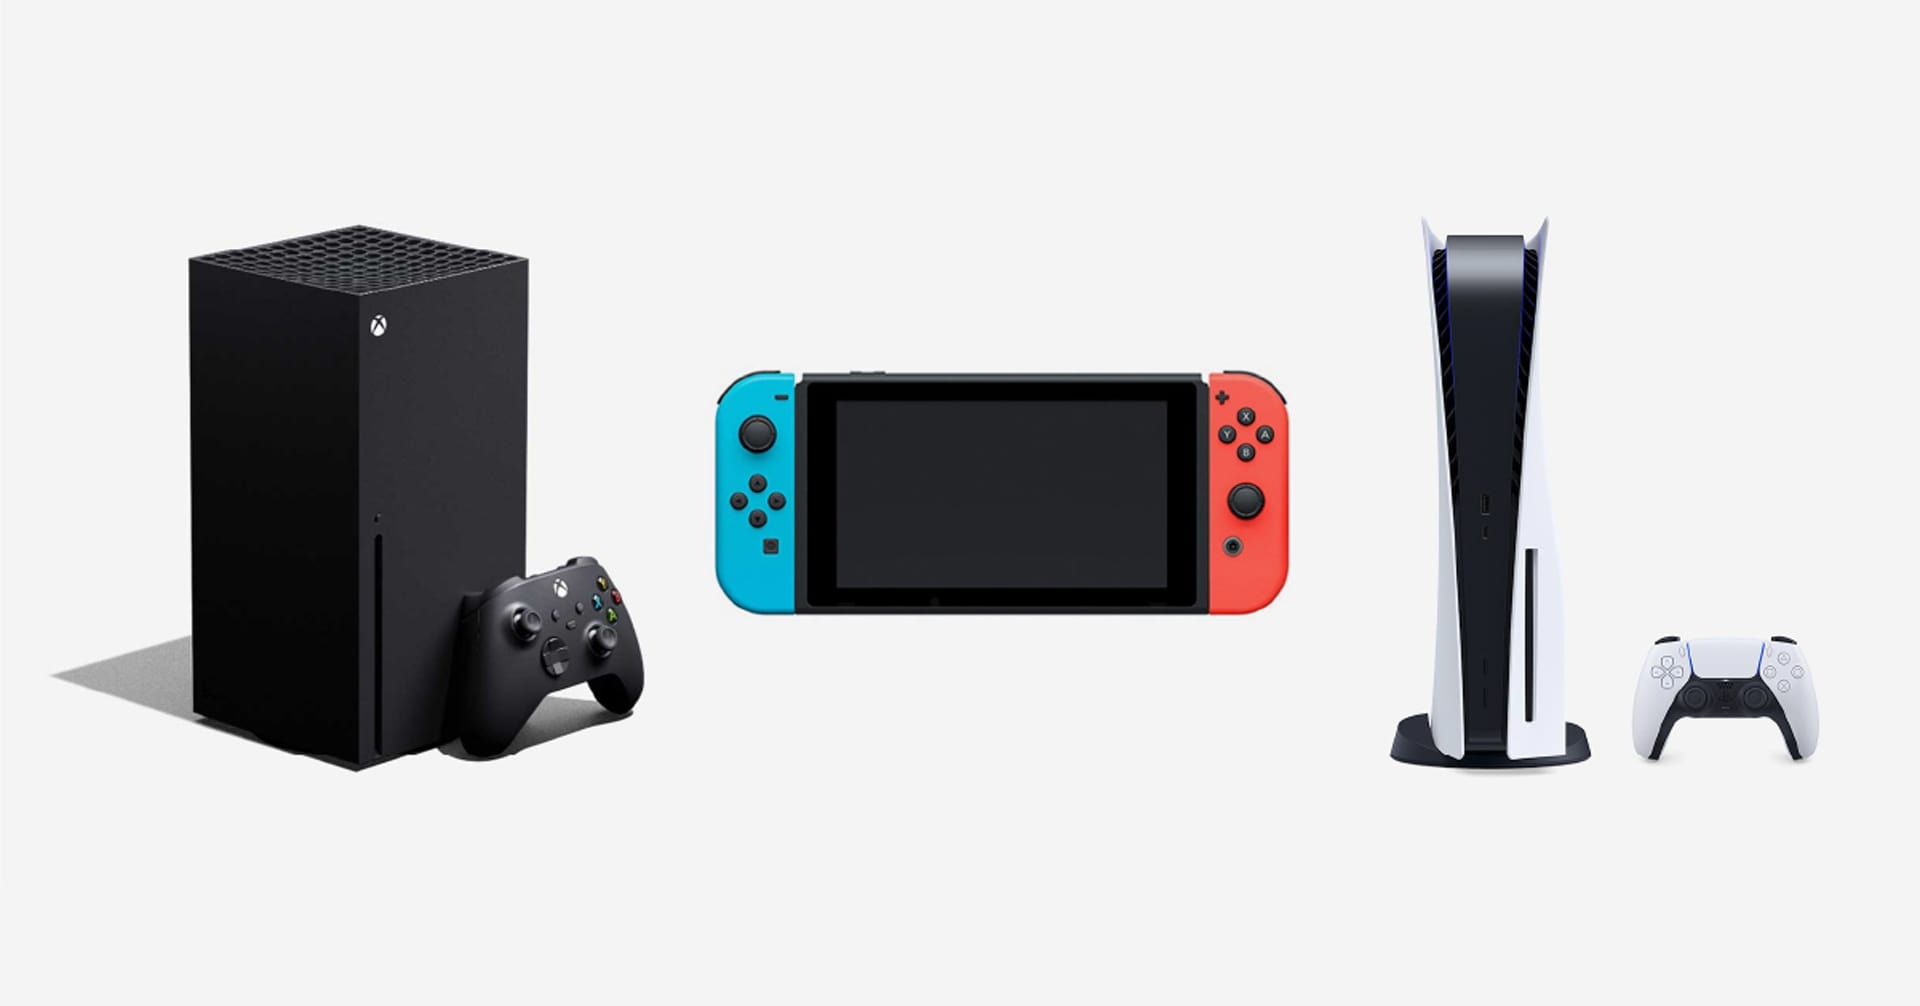 A group of the latest gaming consoles including PlayStation 5, Xbox Series X, and Nintendo Switch OLED